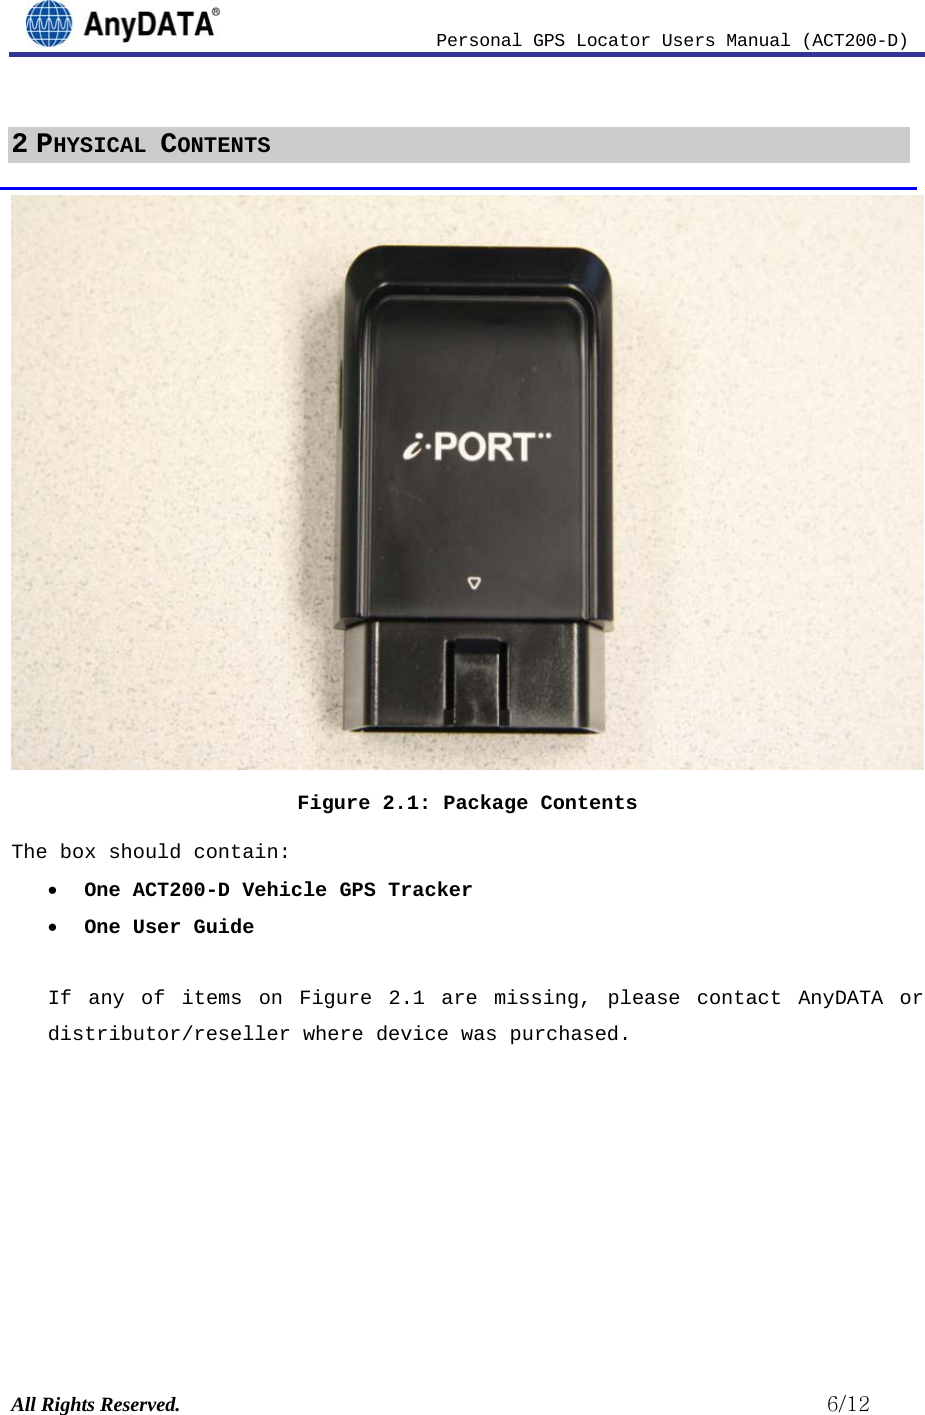                          Personal GPS Locator Users Manual (ACT200-D) All Rights Reserved.                                                          6/12 2 PHYSICAL CONTENTS  Figure 2.1: Package Contents The box should contain: • One ACT200-D Vehicle GPS Tracker • One User Guide  If any of items on Figure 2.1 are missing, please contact AnyDATA or distributor/reseller where device was purchased.         